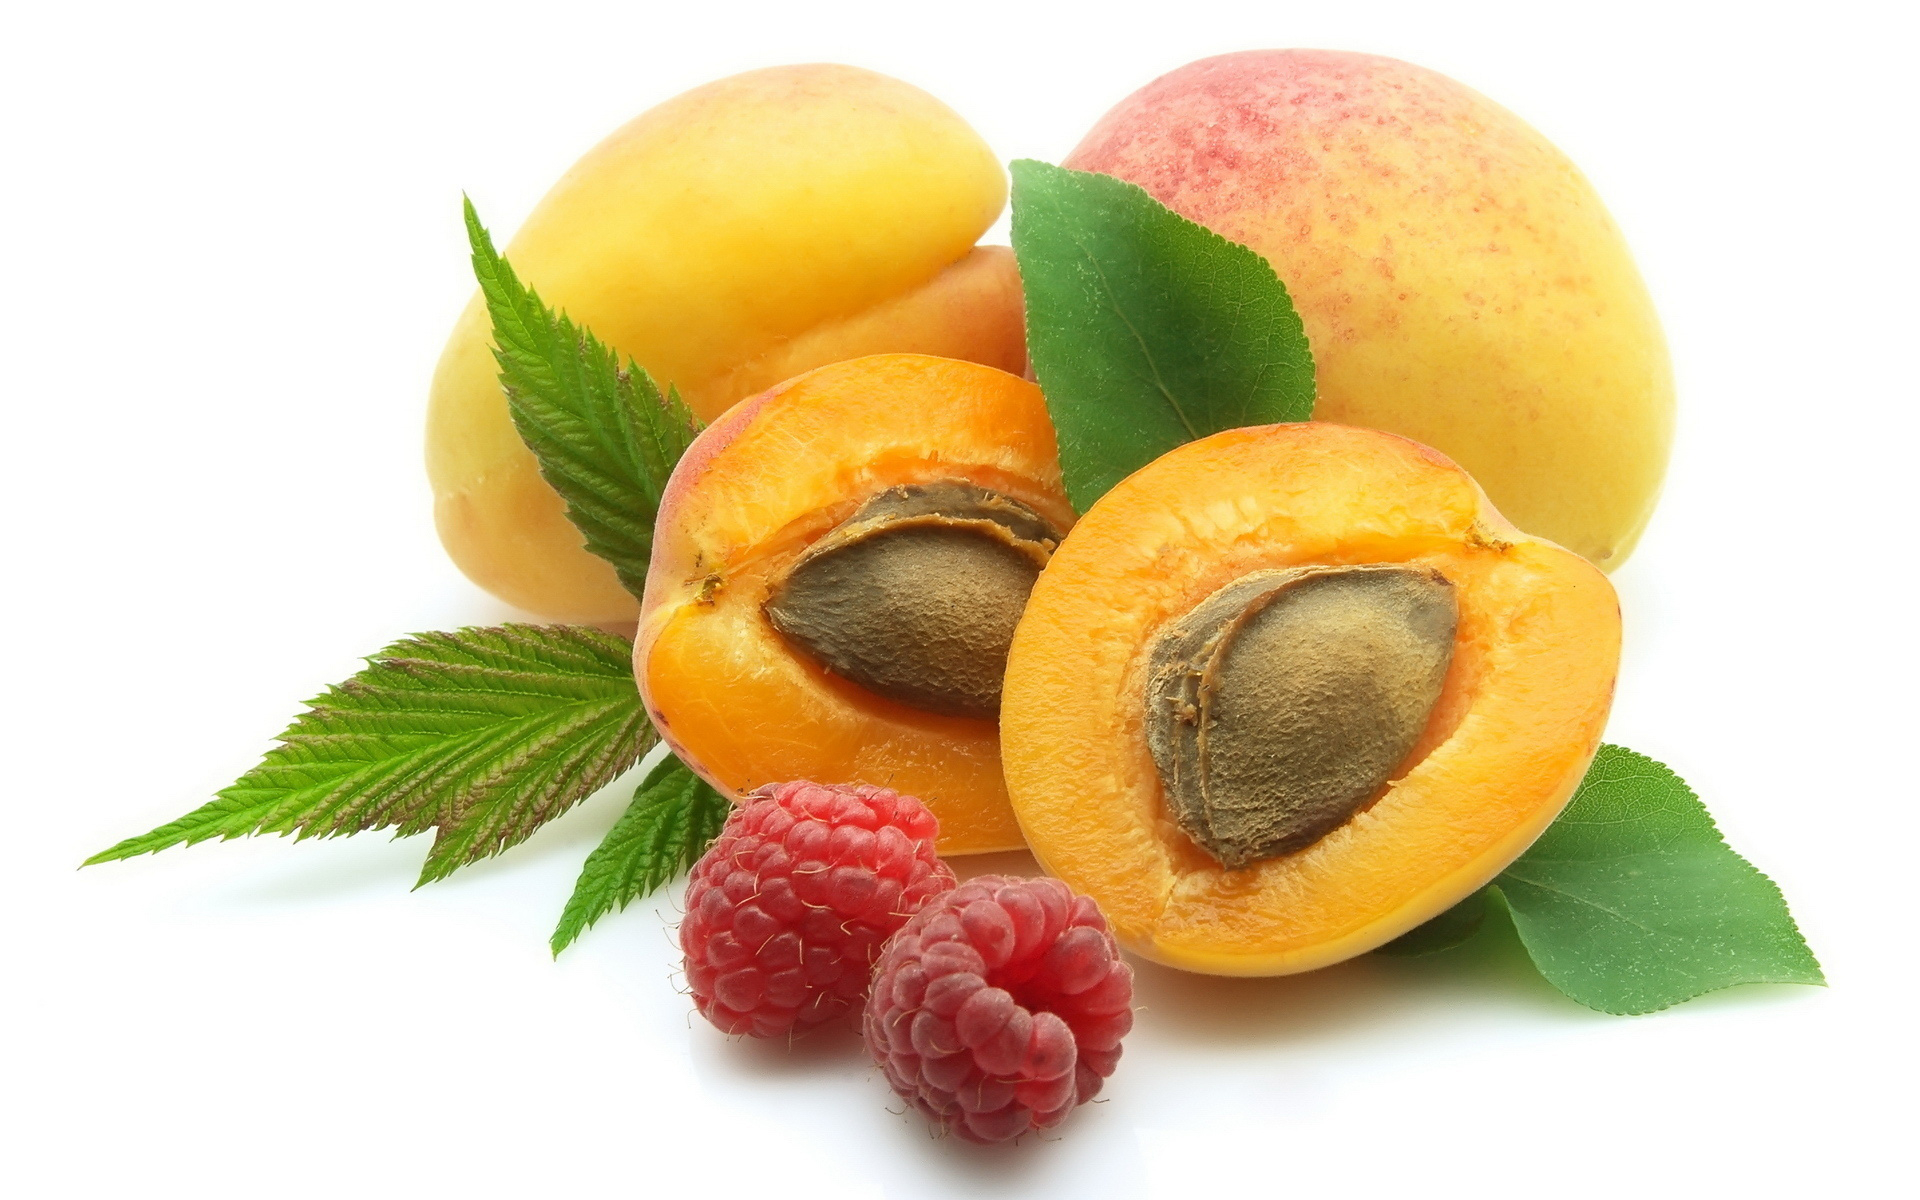 Food_Berries__fruits__nuts_Peach_and_Raspberry_033815_